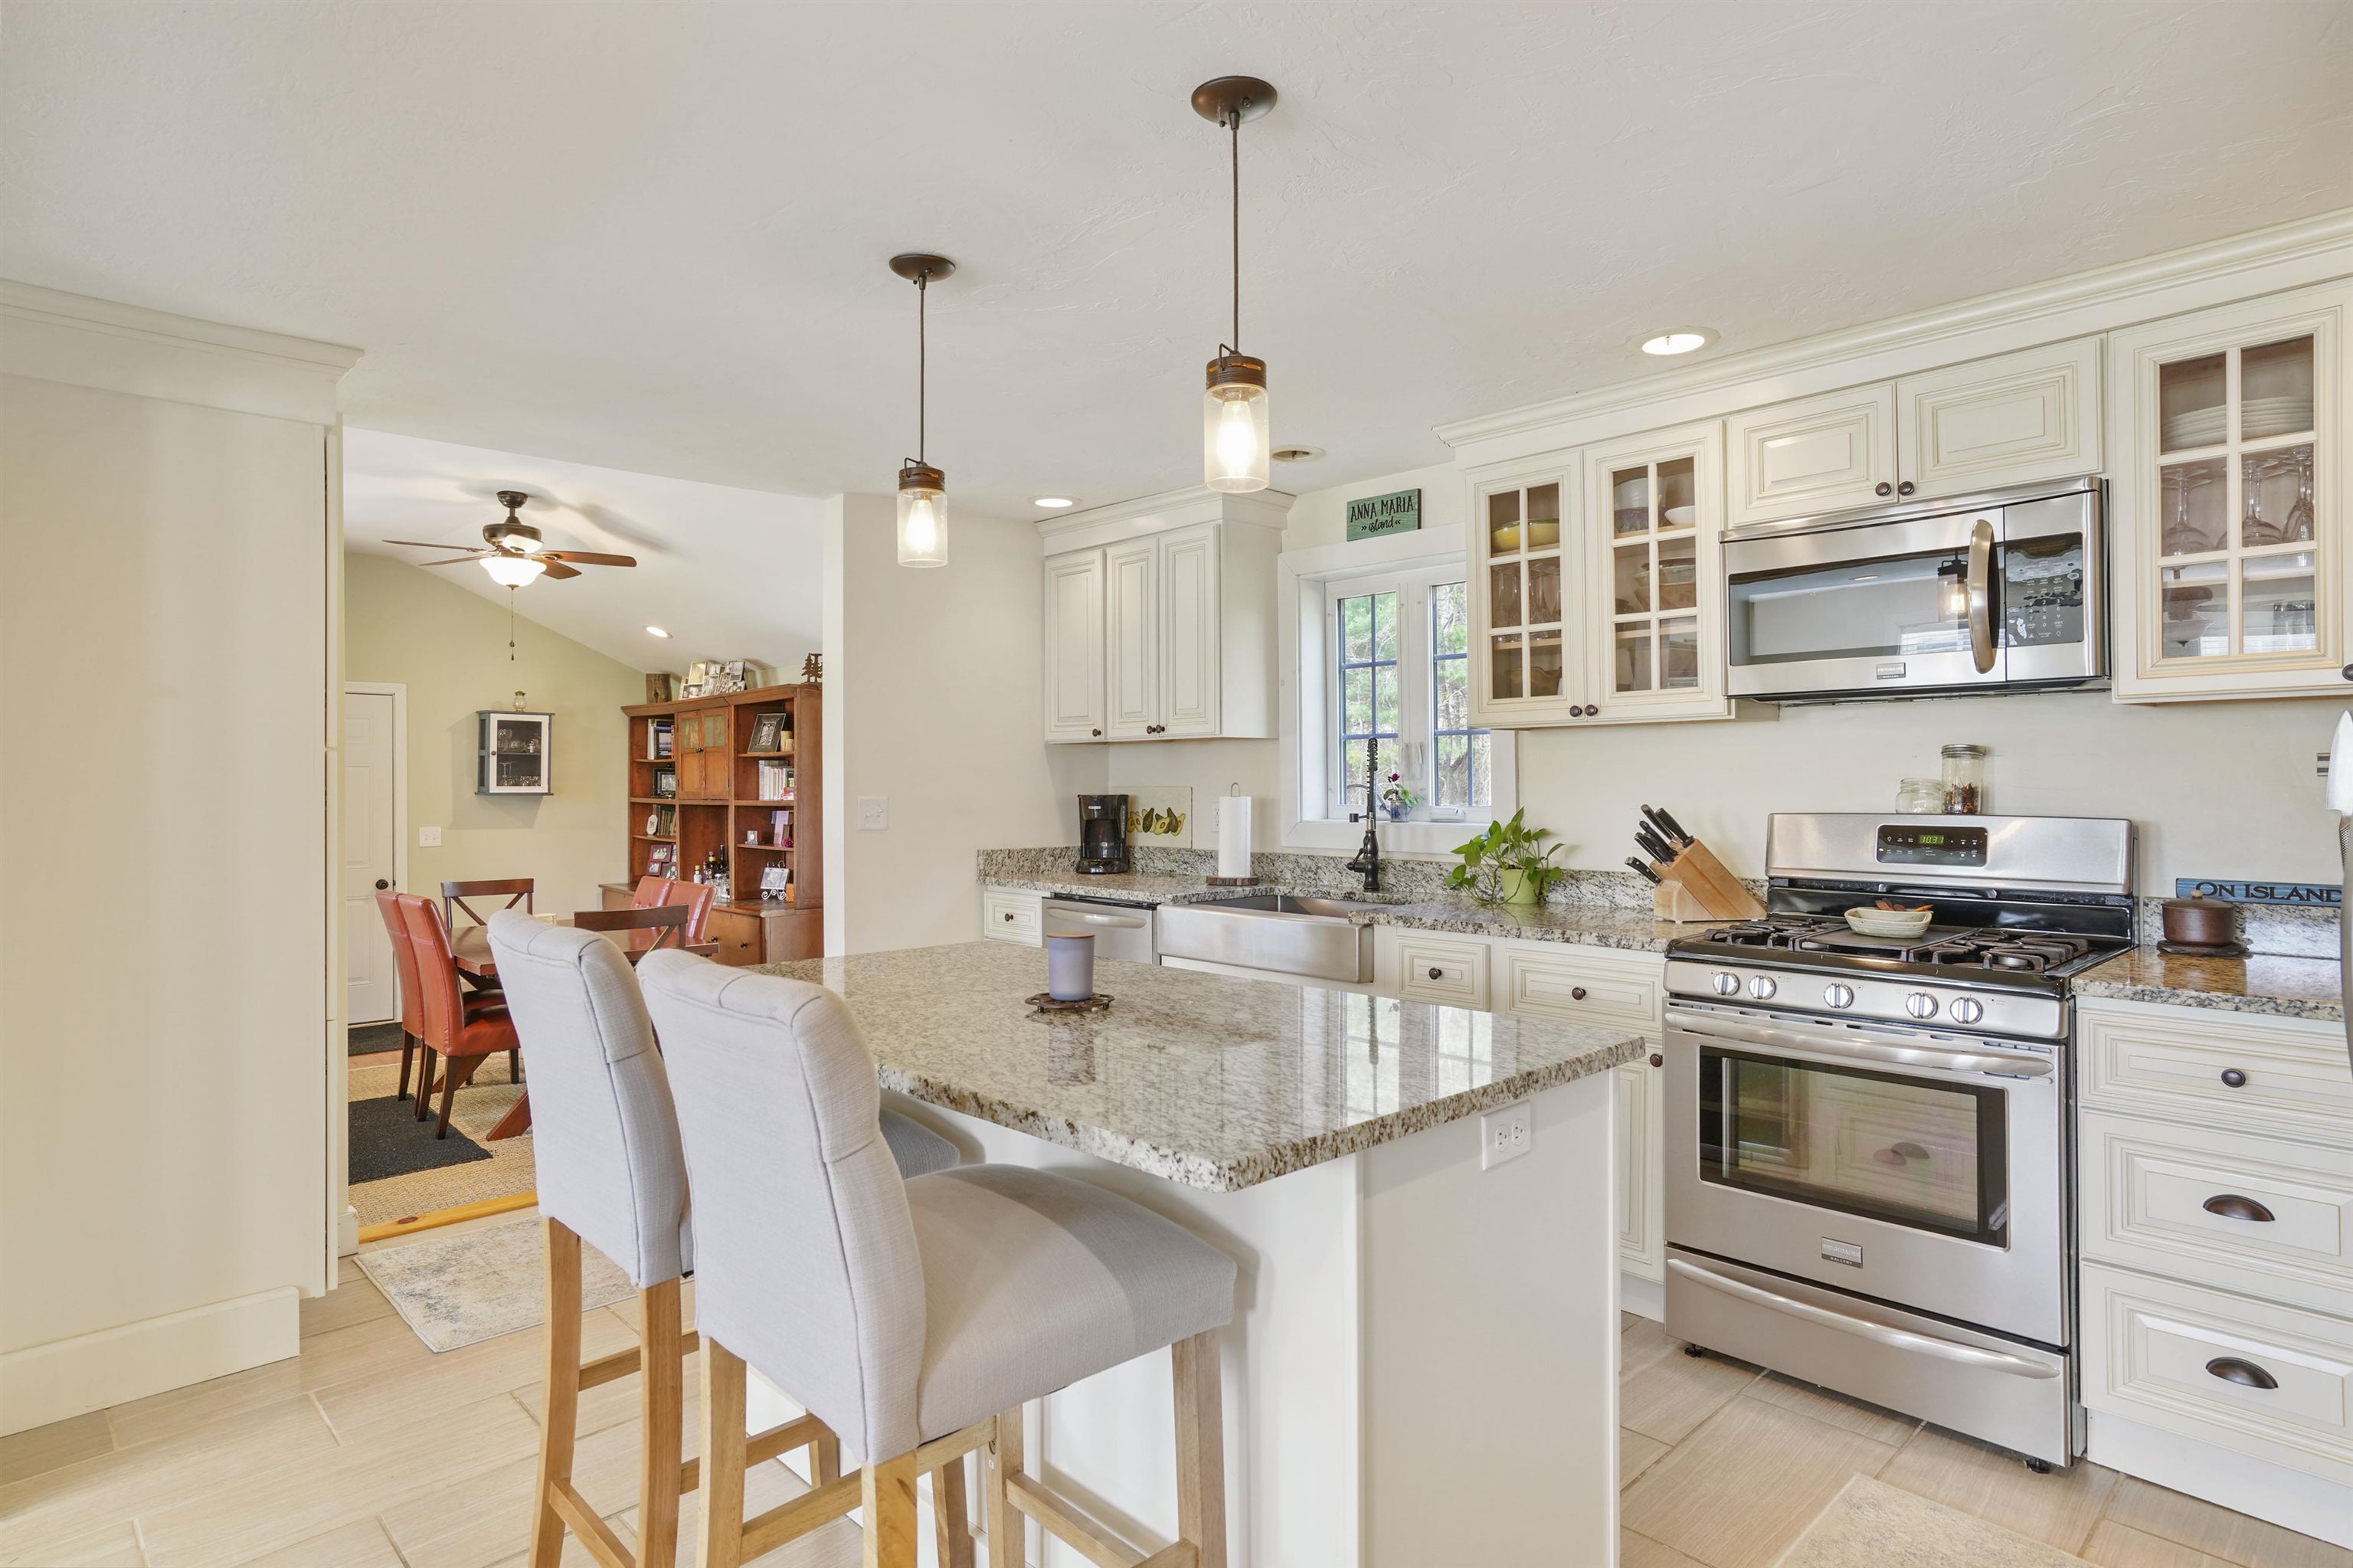 There is no shortage of cabinet space in this lovely kitchen!